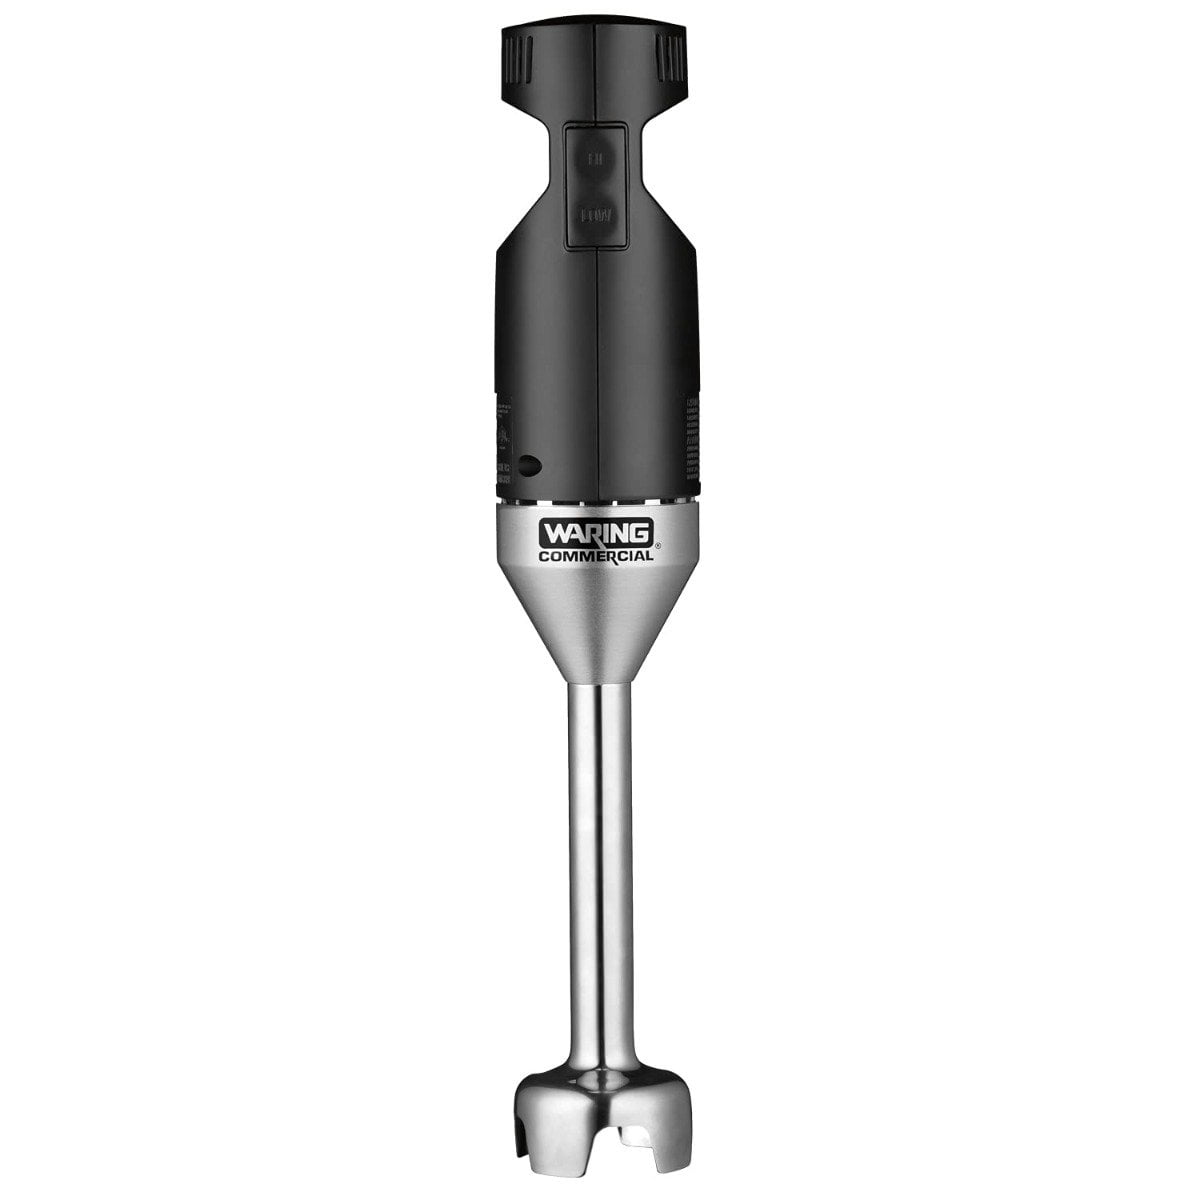 190mm Stainless Steel Stick Electric Immersion Blender Commercial Hand Held Stick Blender Mixer Vegetables & Potatoes